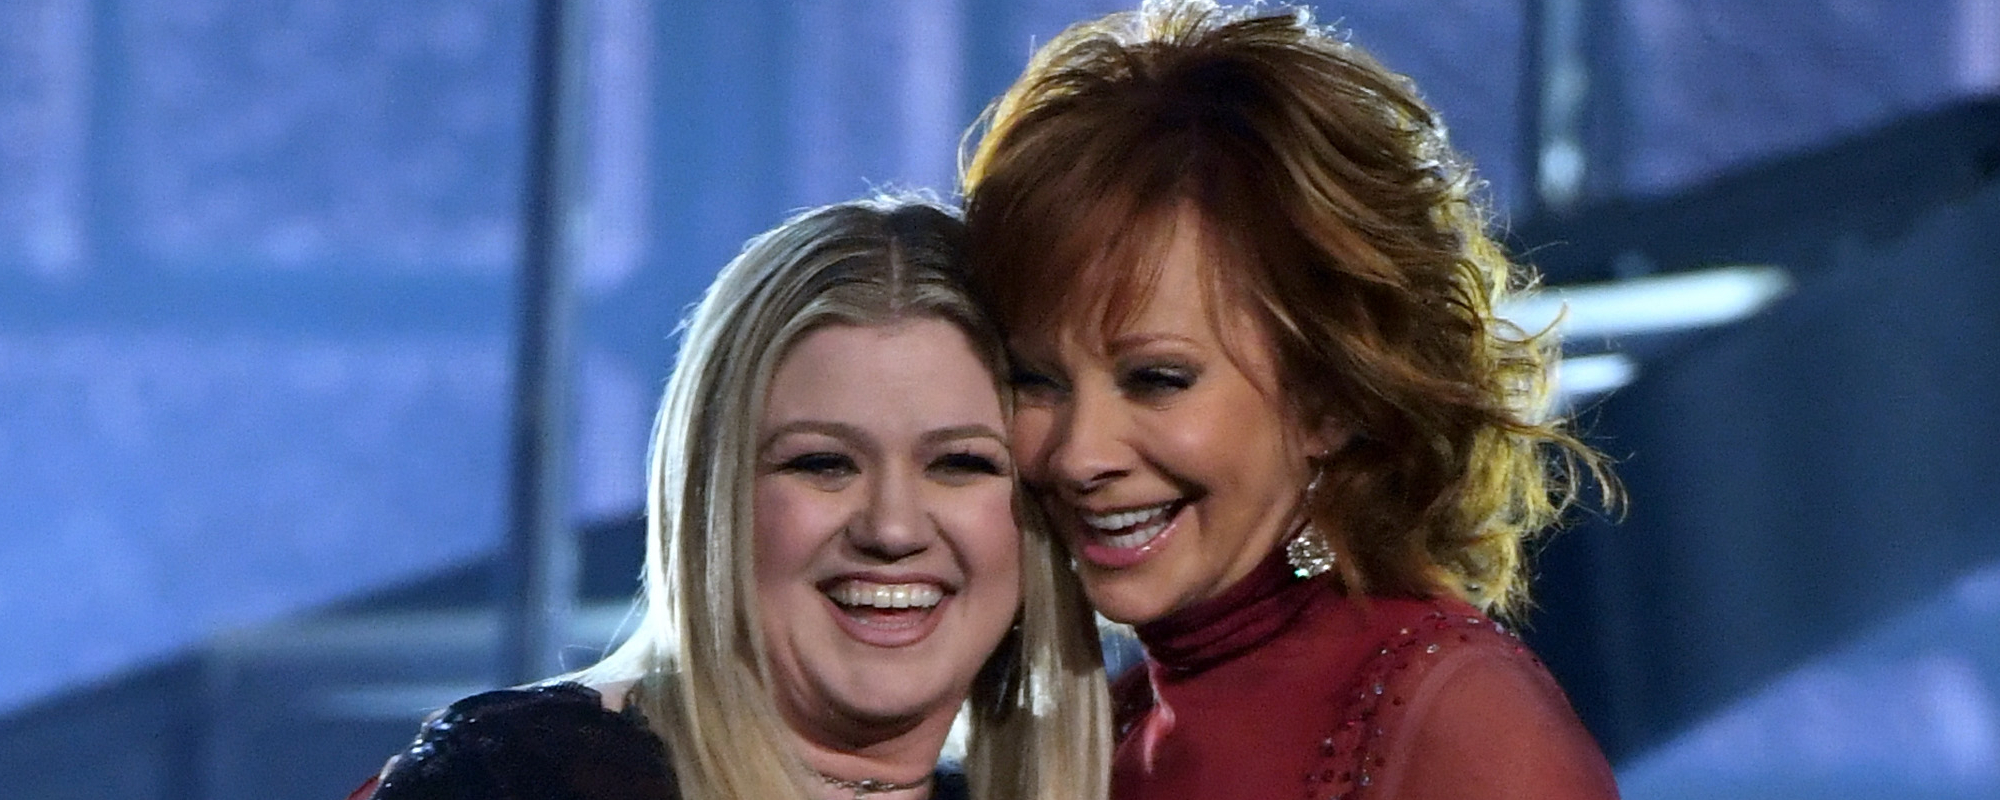 4 of Reba McEntire’s Best ACM Awards Moments Ever